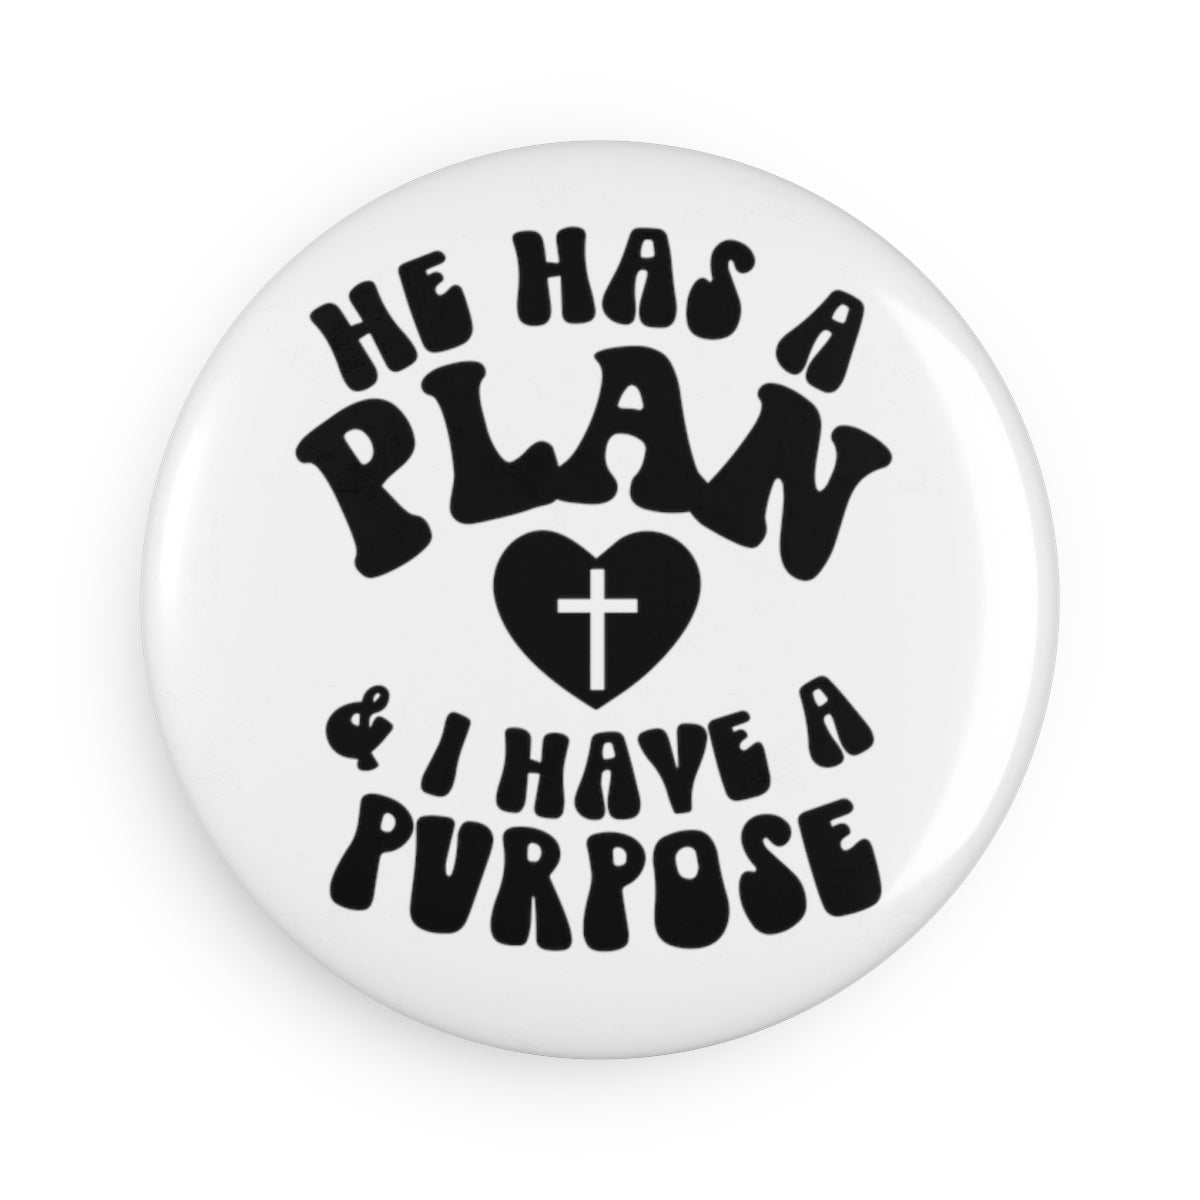 He has a plan and i have purpose Button Magnet, Round (1 & 10 pcs)